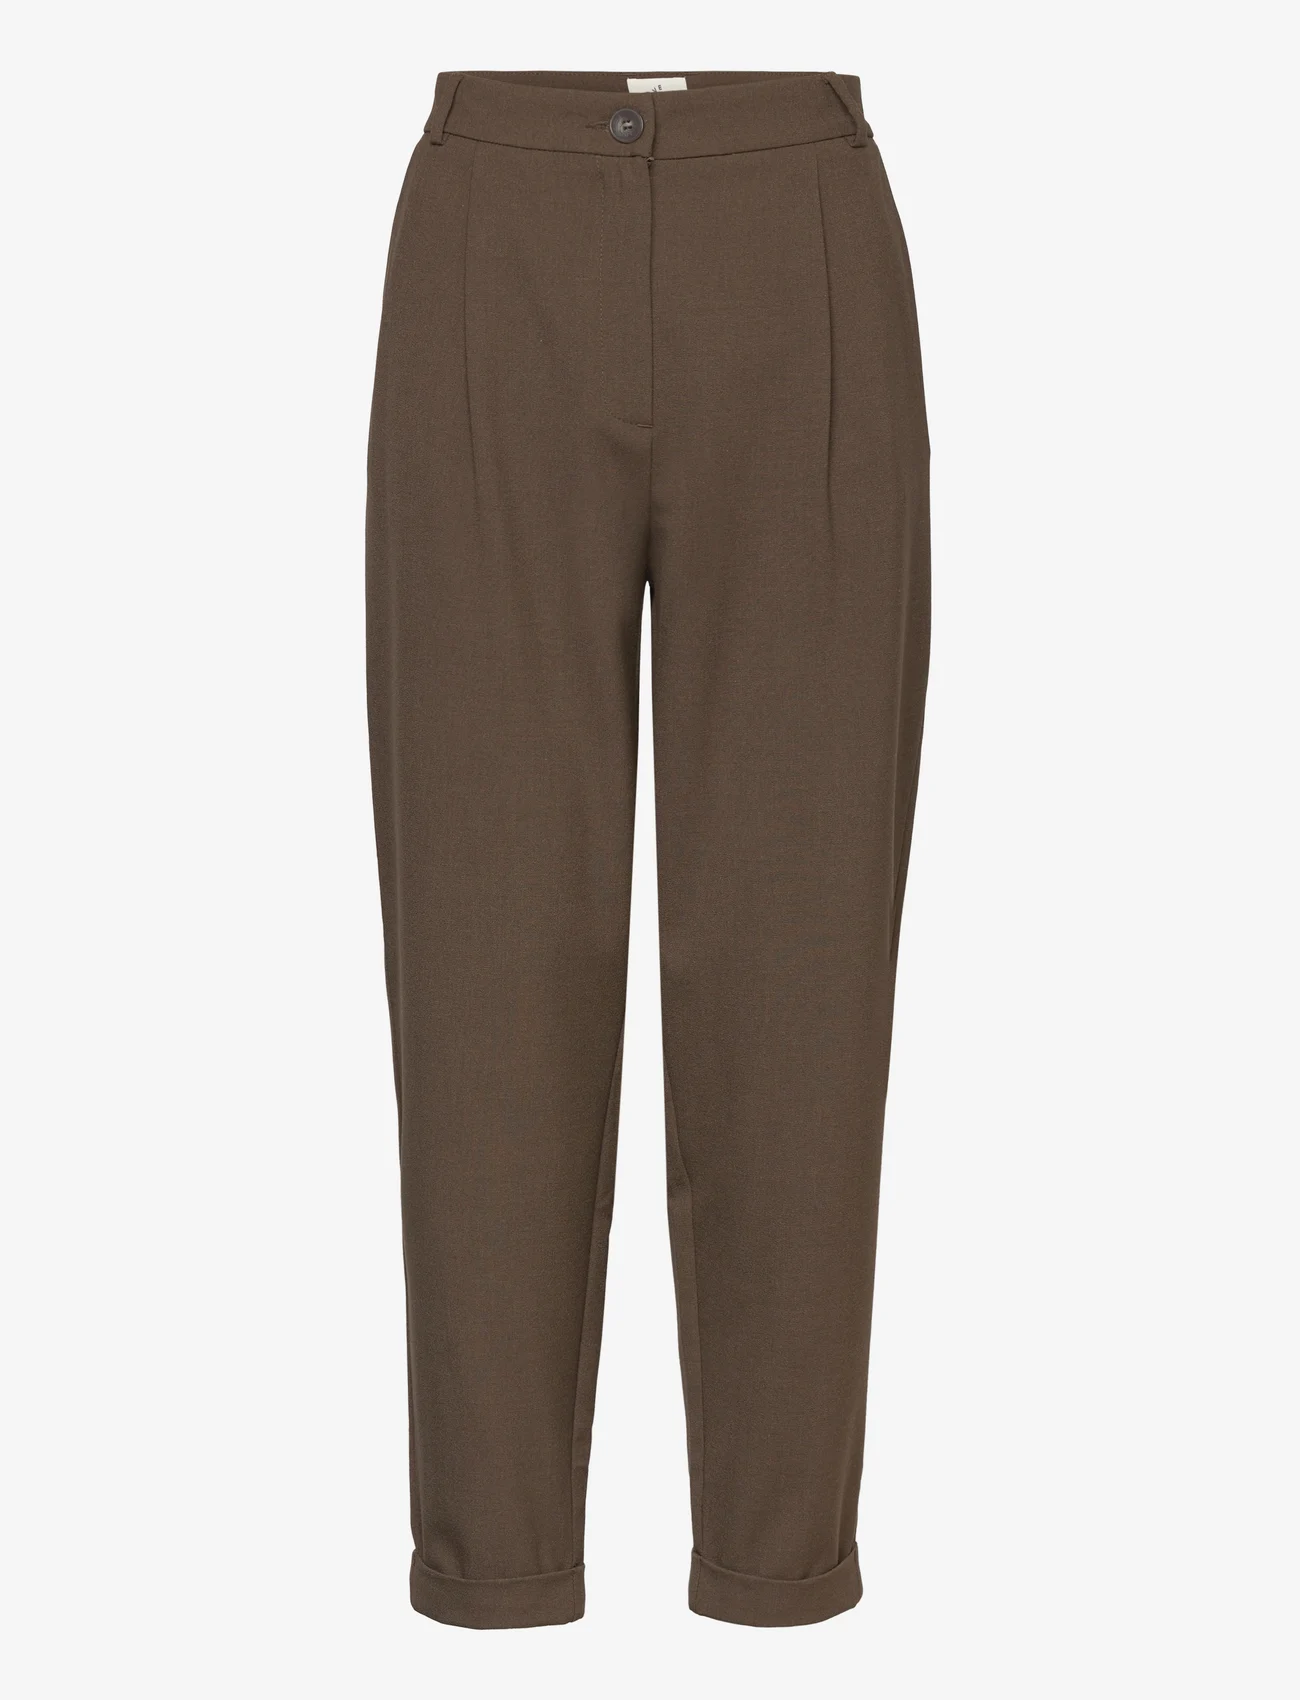 FIVEUNITS - Malou - tailored trousers - grey brown melange - 0